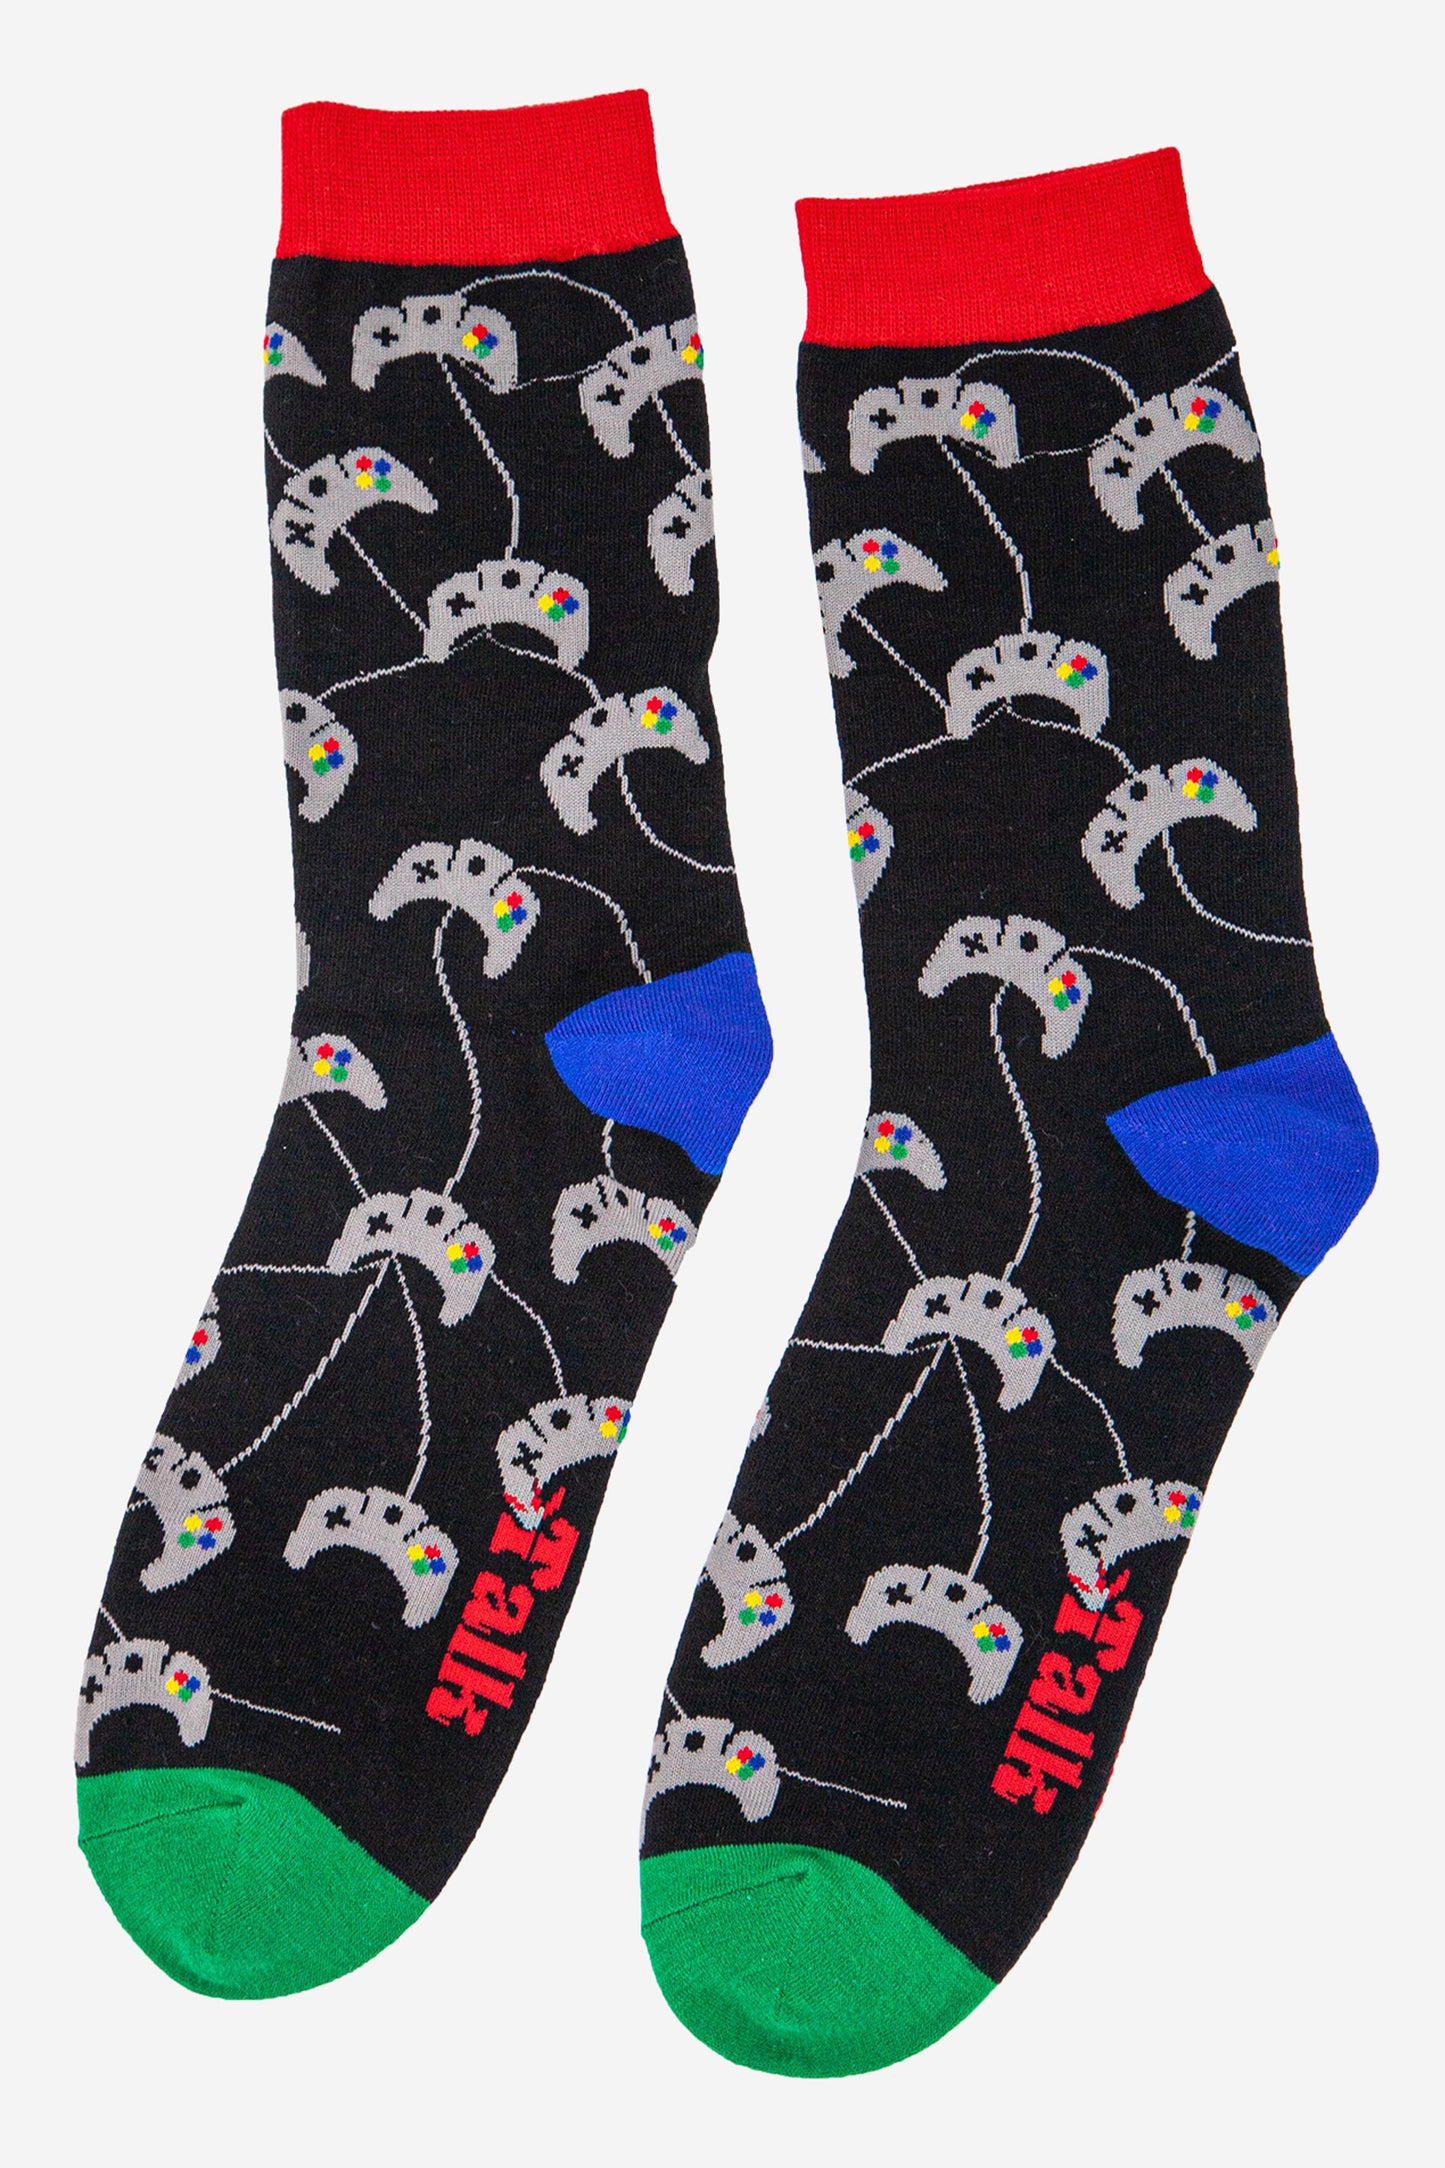 mens novelty socks featuring an all over pattern of grey game console controllers